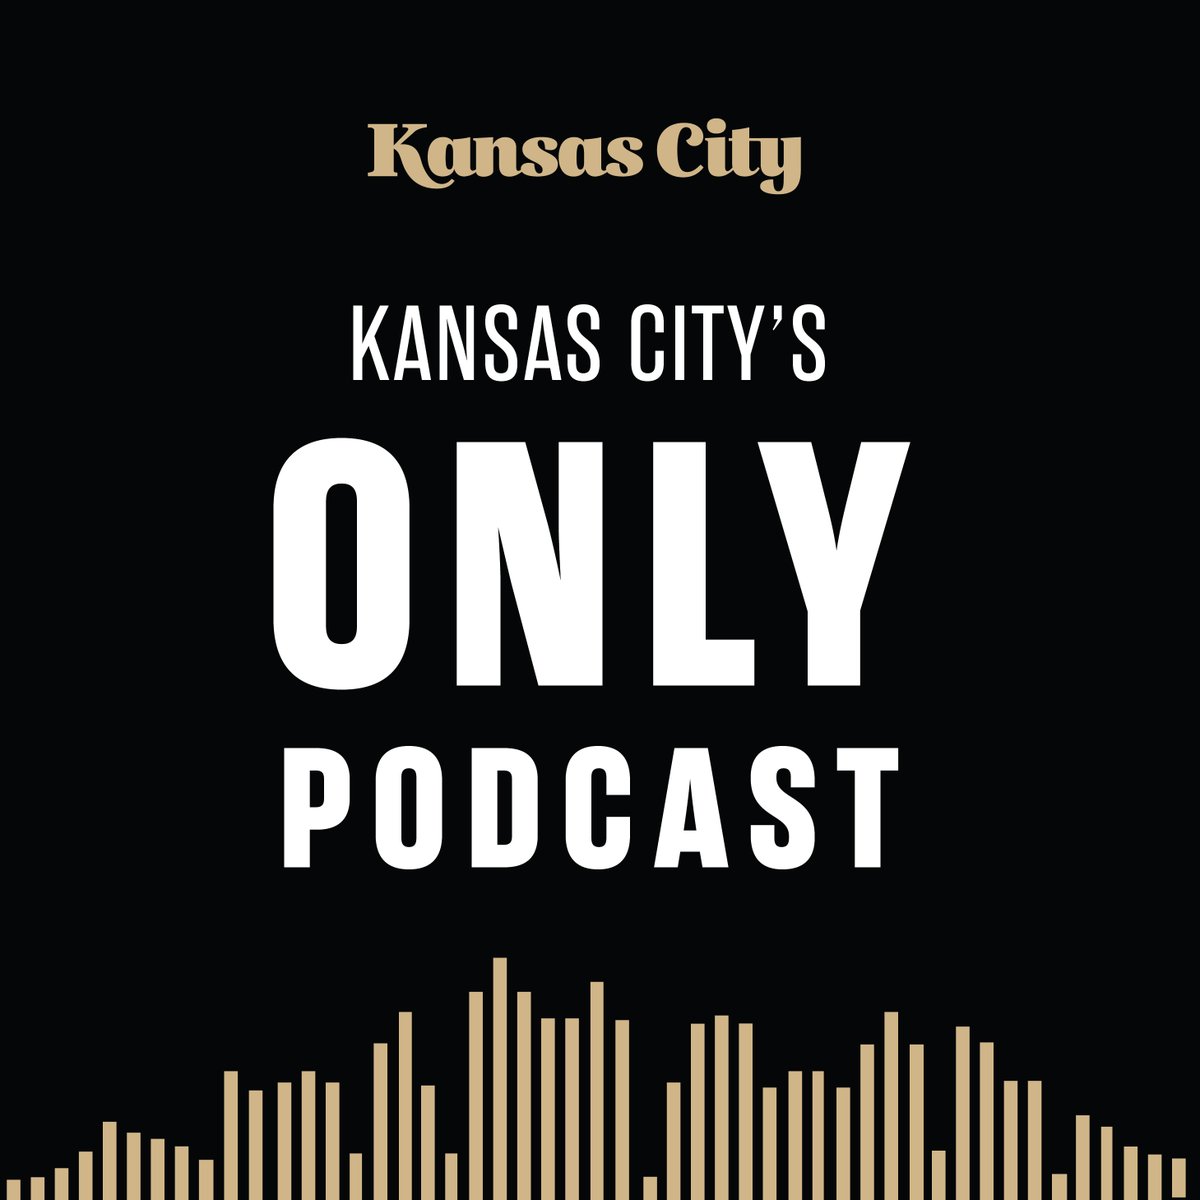 NEWS! I am now producing @kansascitymag's podcast, 'Kansas City's Only Podcast.' It's hosted by @martincizmar and it's gonna come out weekly. The 1st episode is out now! It will be on Apple, Spotify, & those places soon. But you can listen to it now here: tinyurl.com/ksdz6c2d